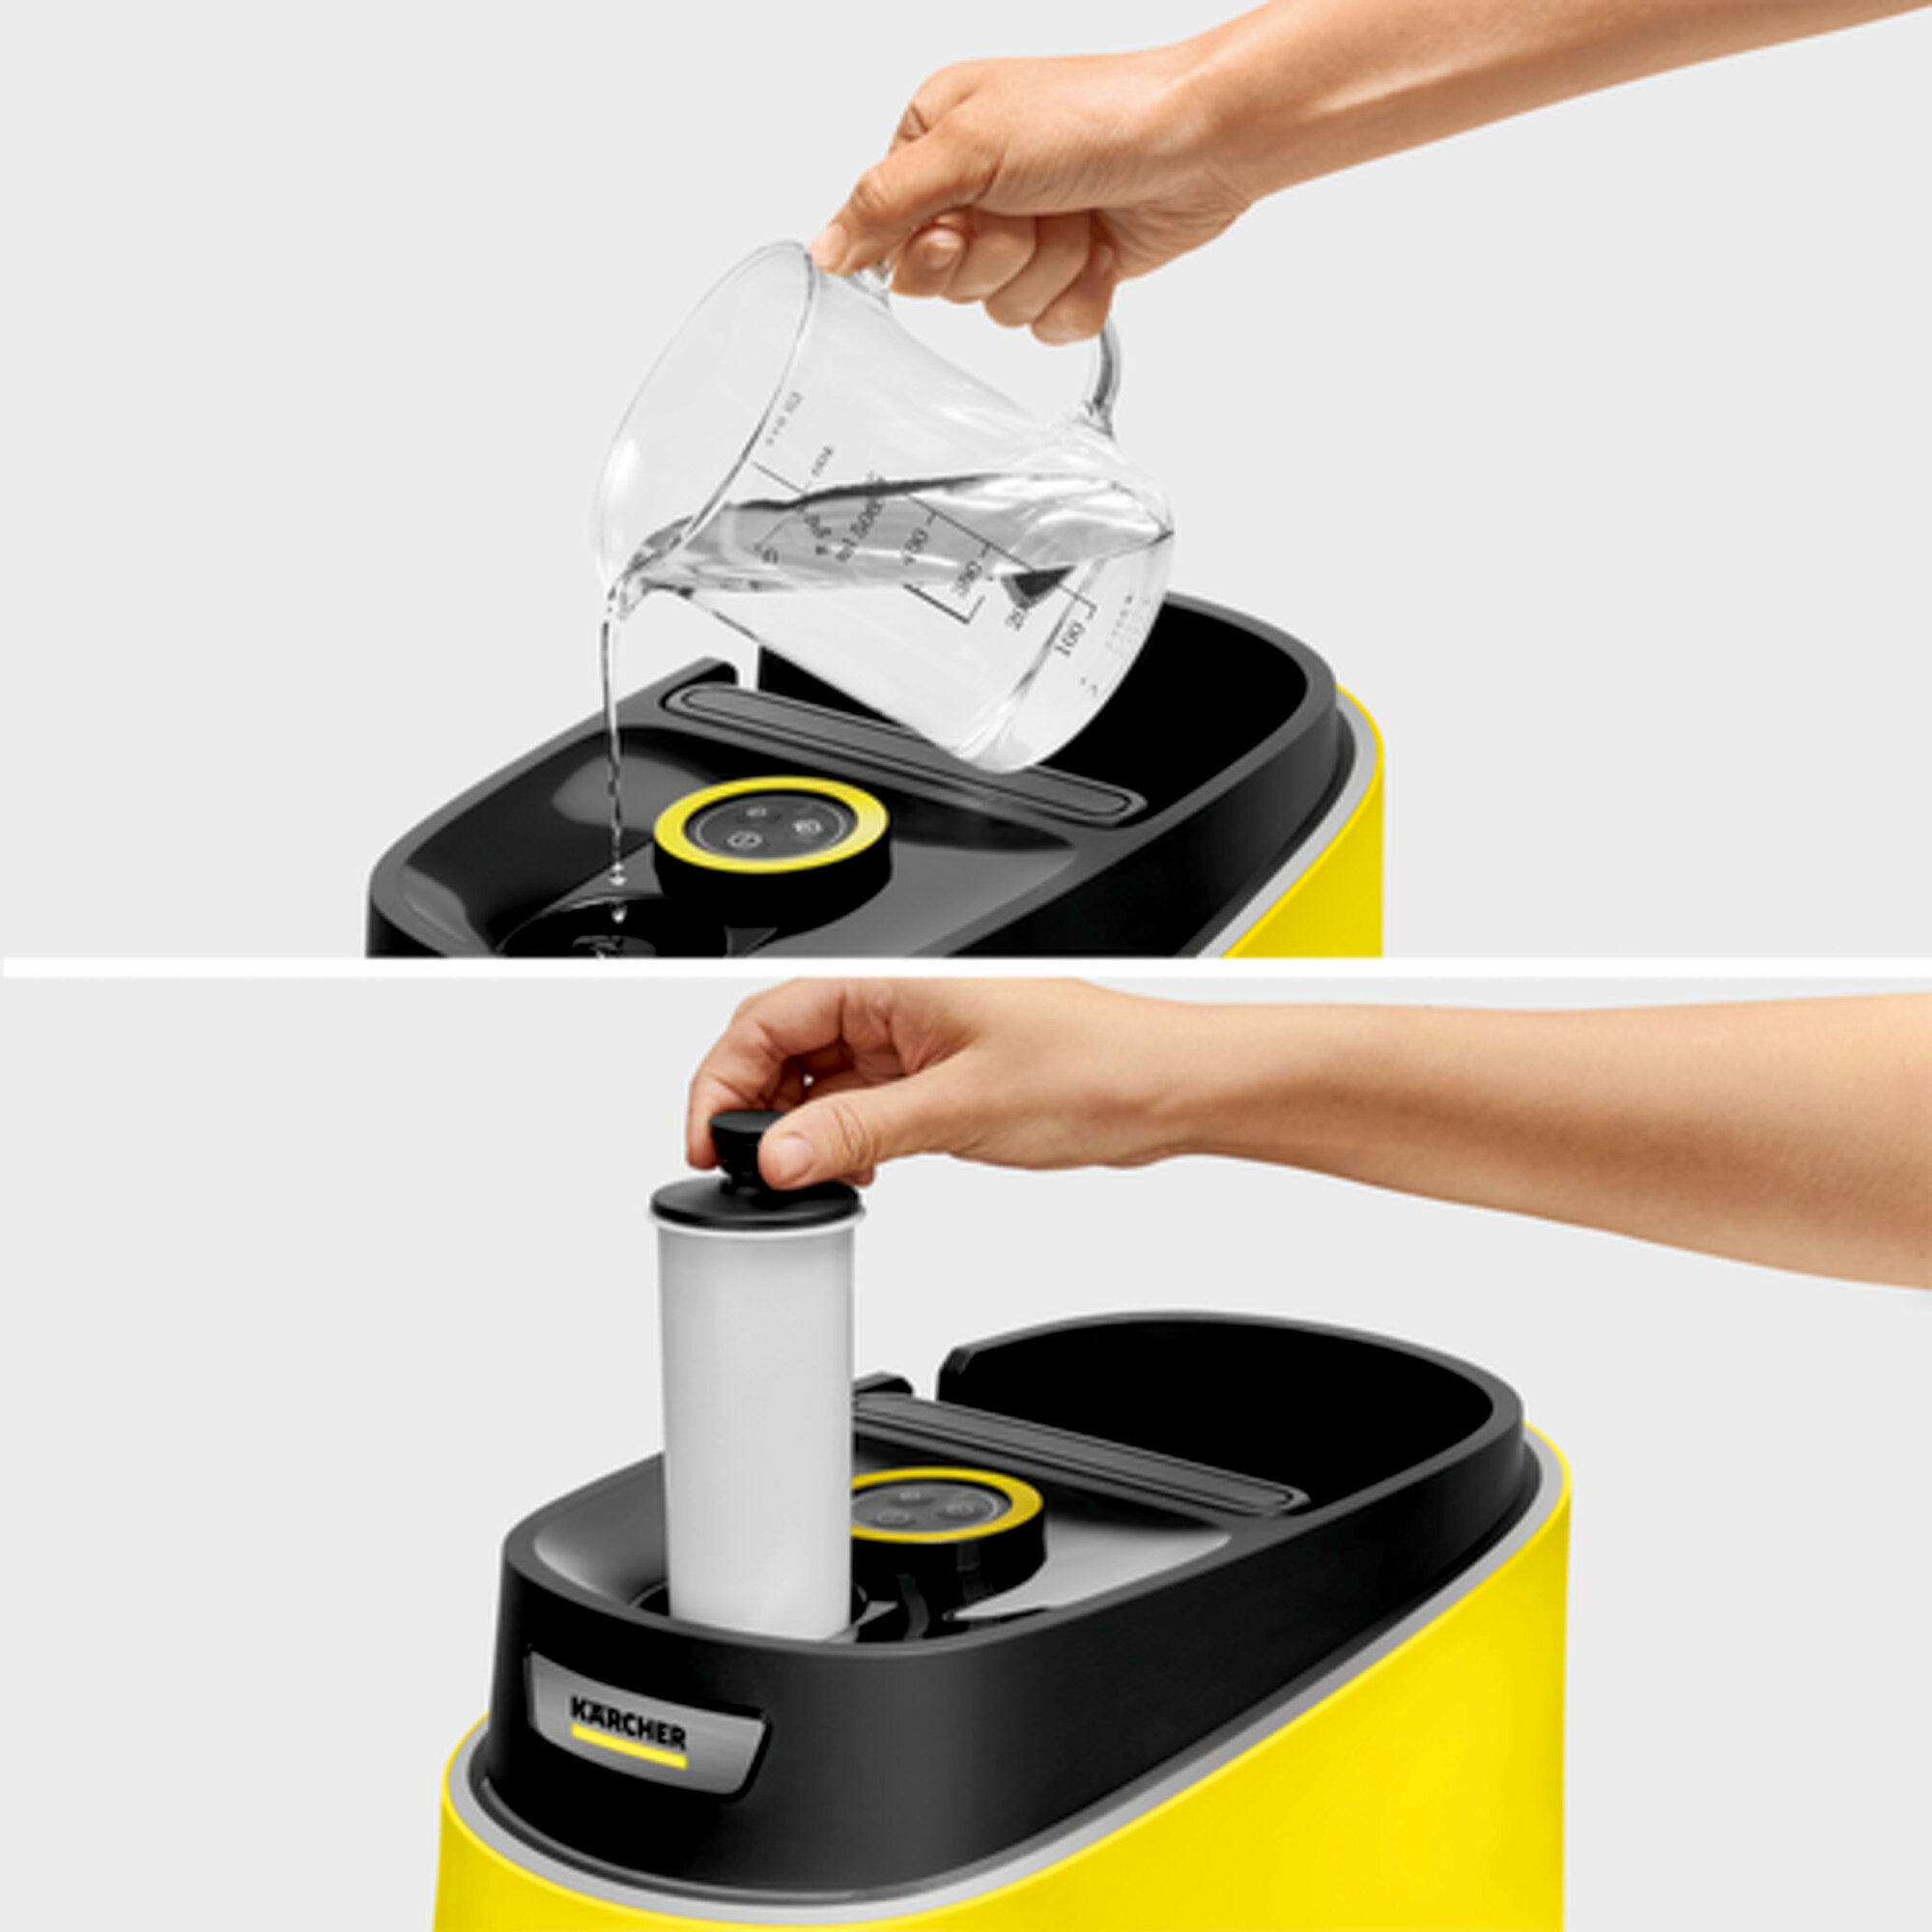 Steam cleaner SC 3 Deluxe EasyFix: Non-stop steam and integrated descaling cartridge